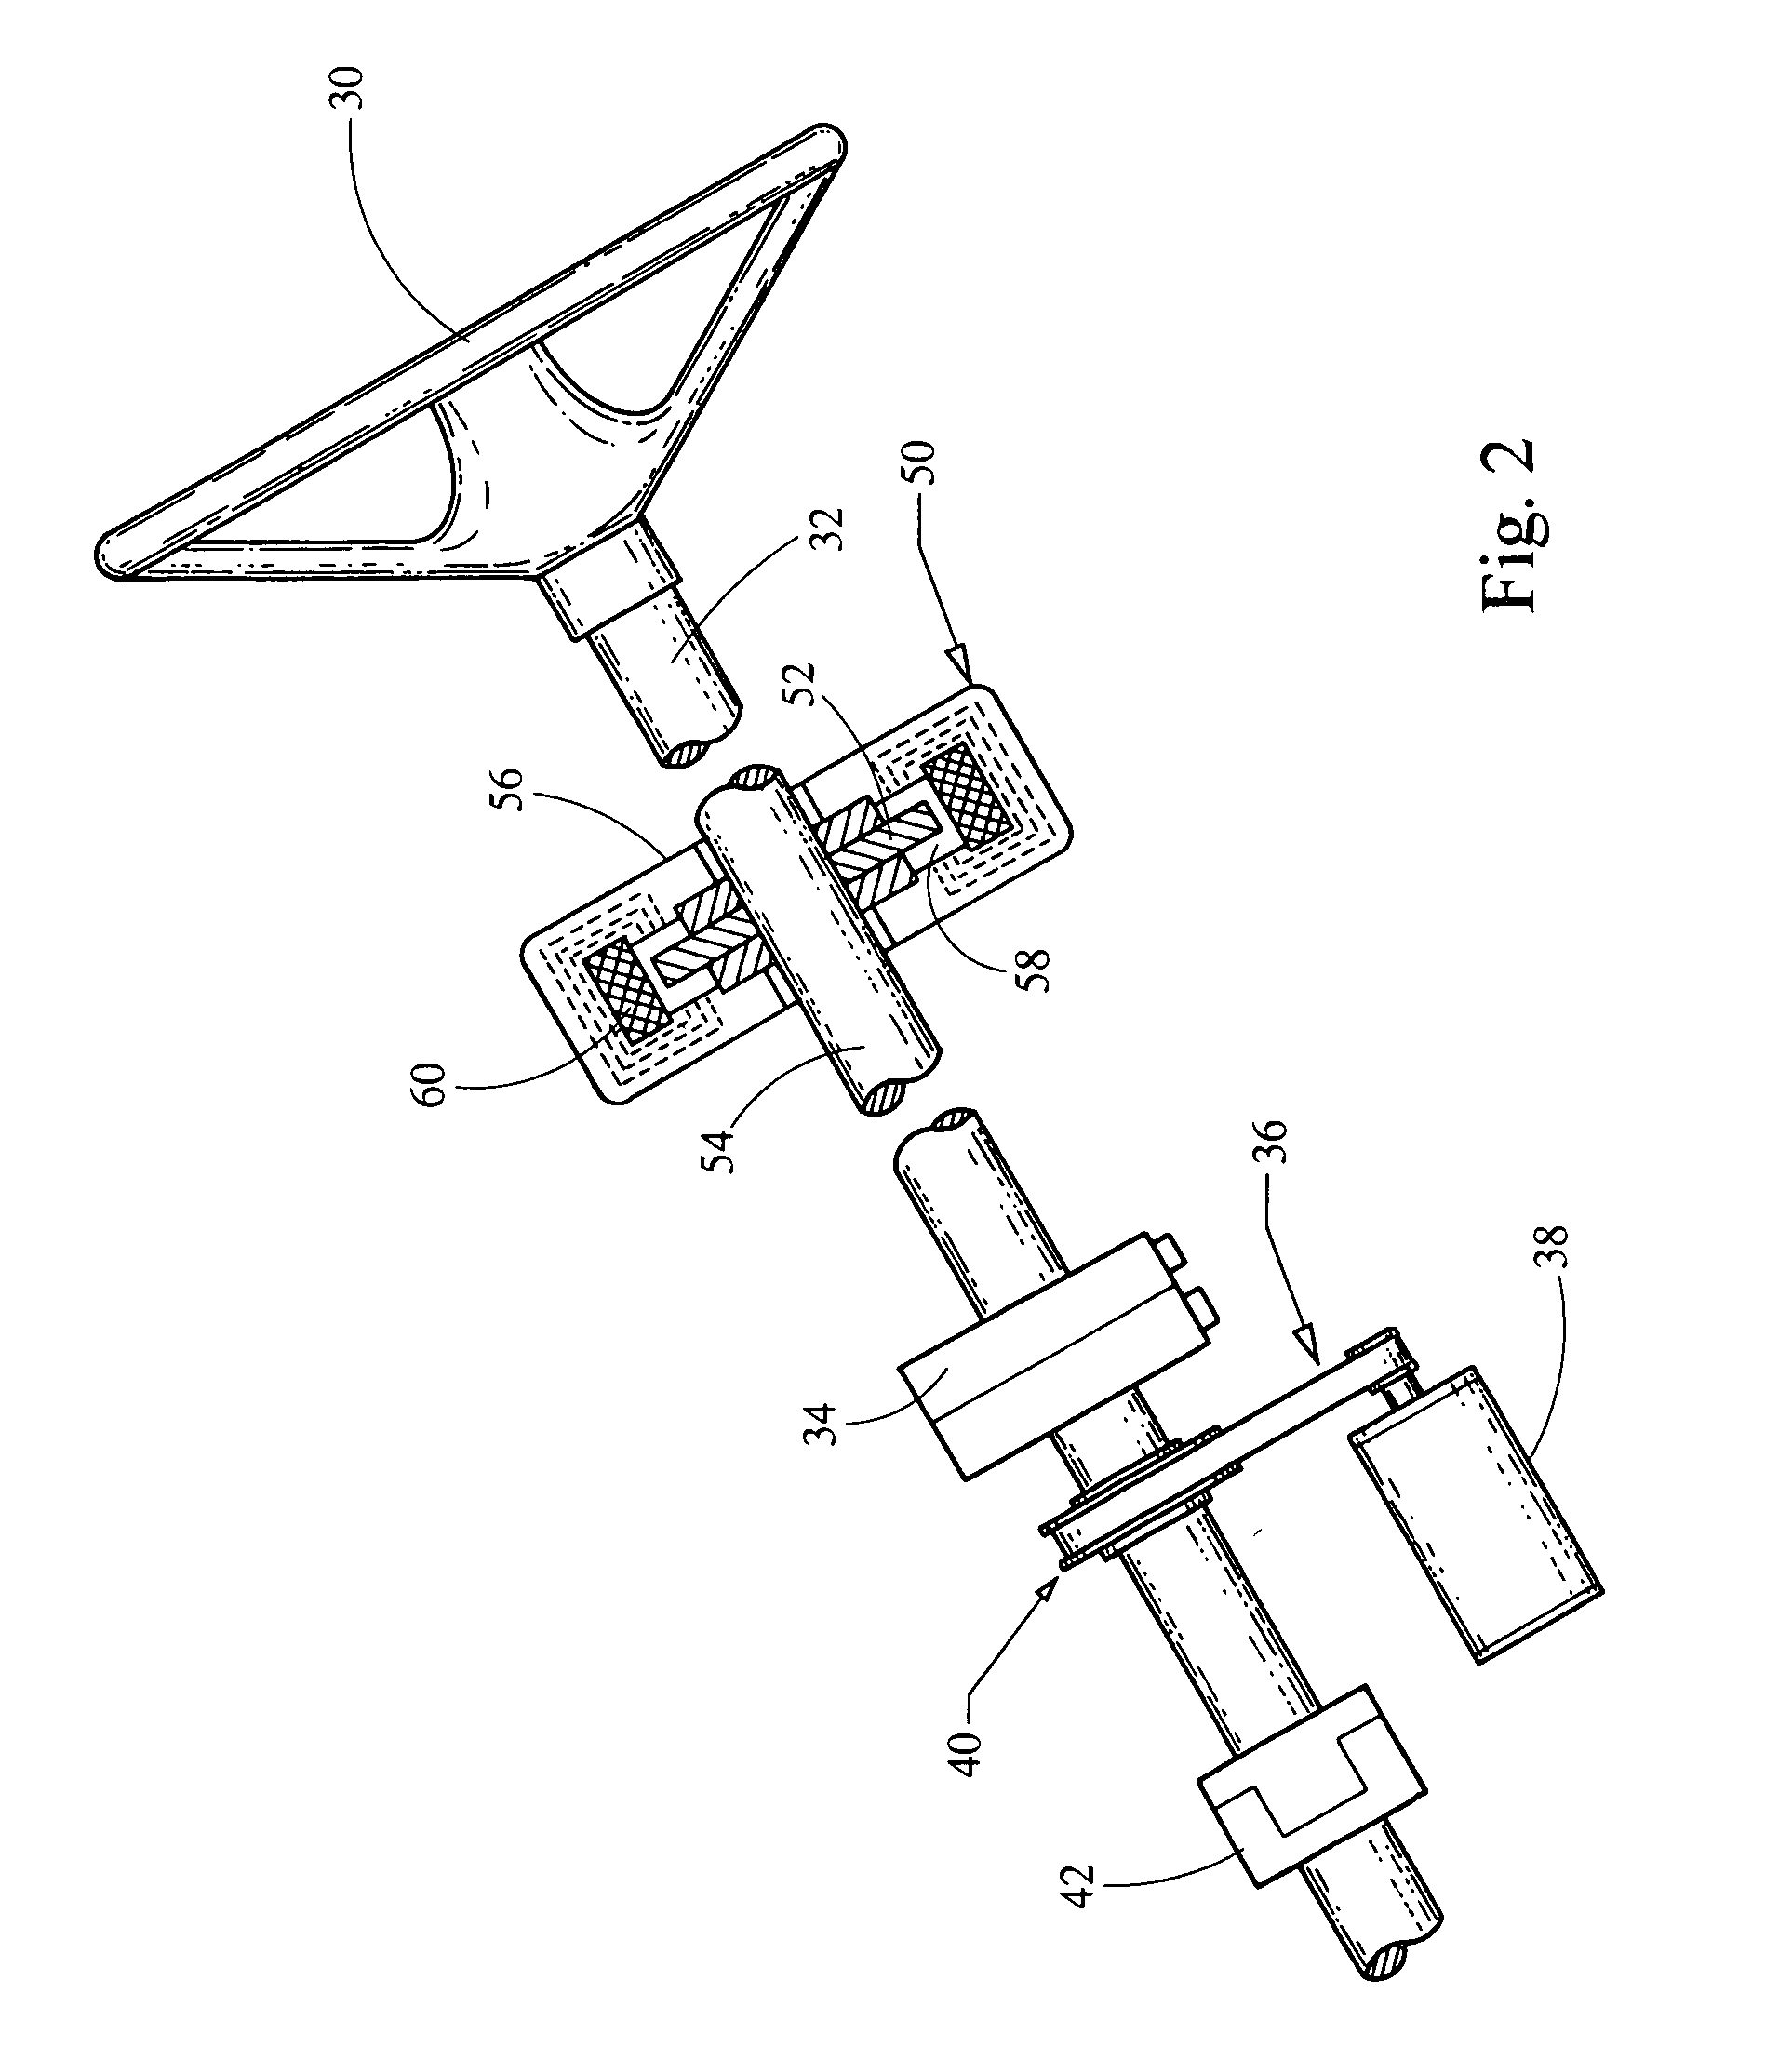 Driver interface system for steer-by-wire system